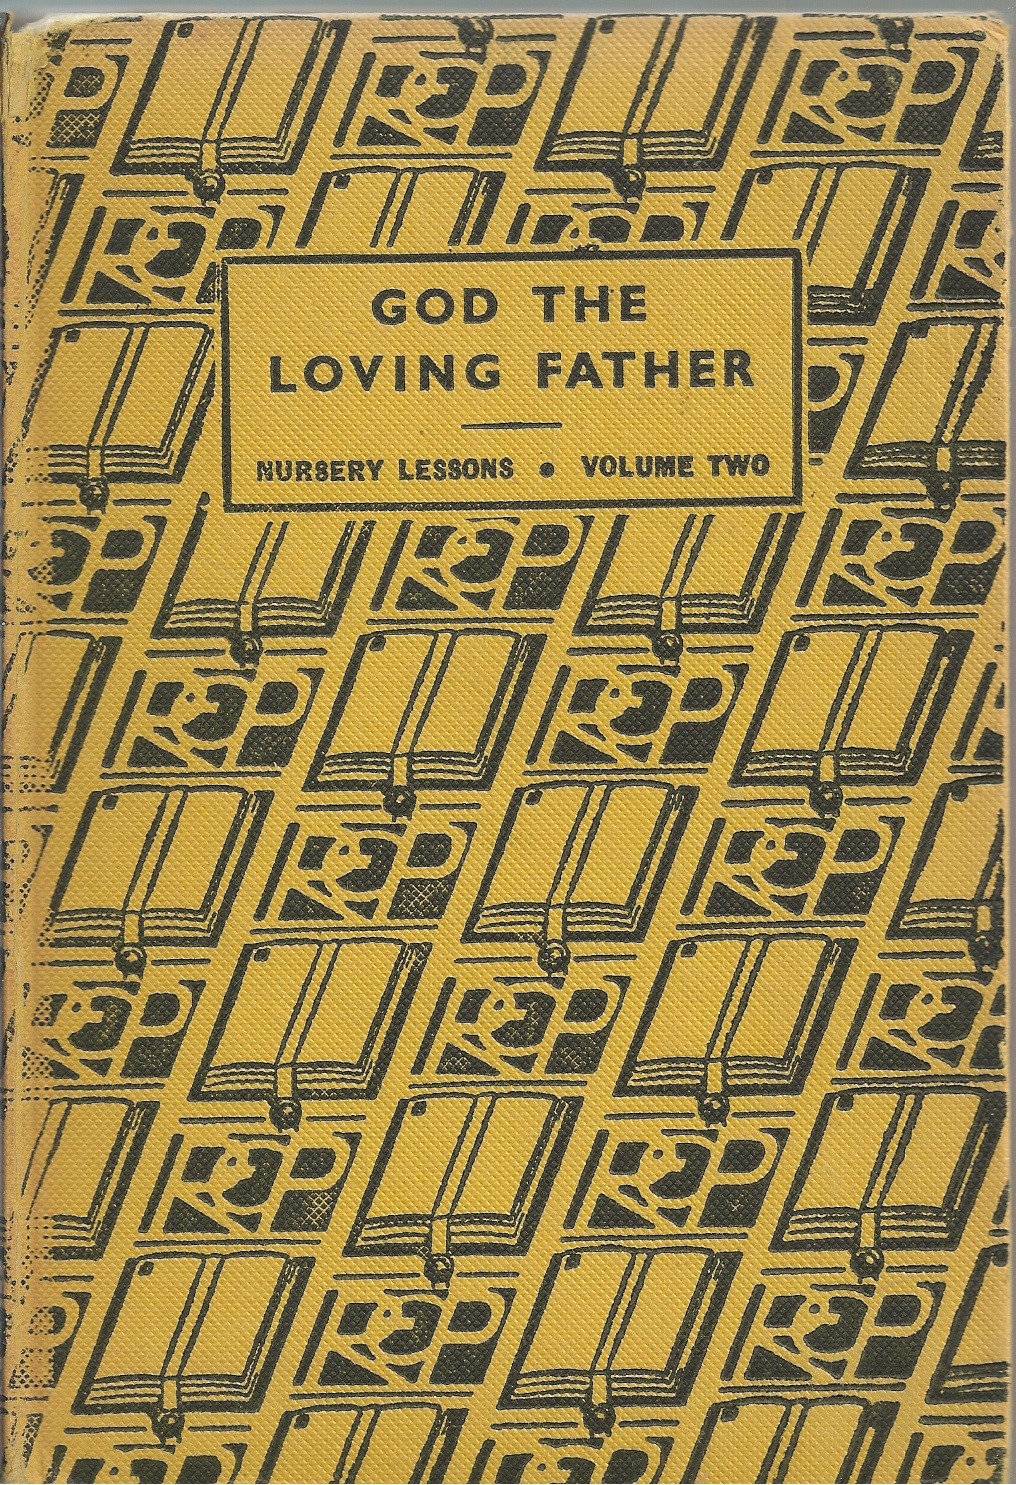 ROSE HELEN M. - God the Loving Father